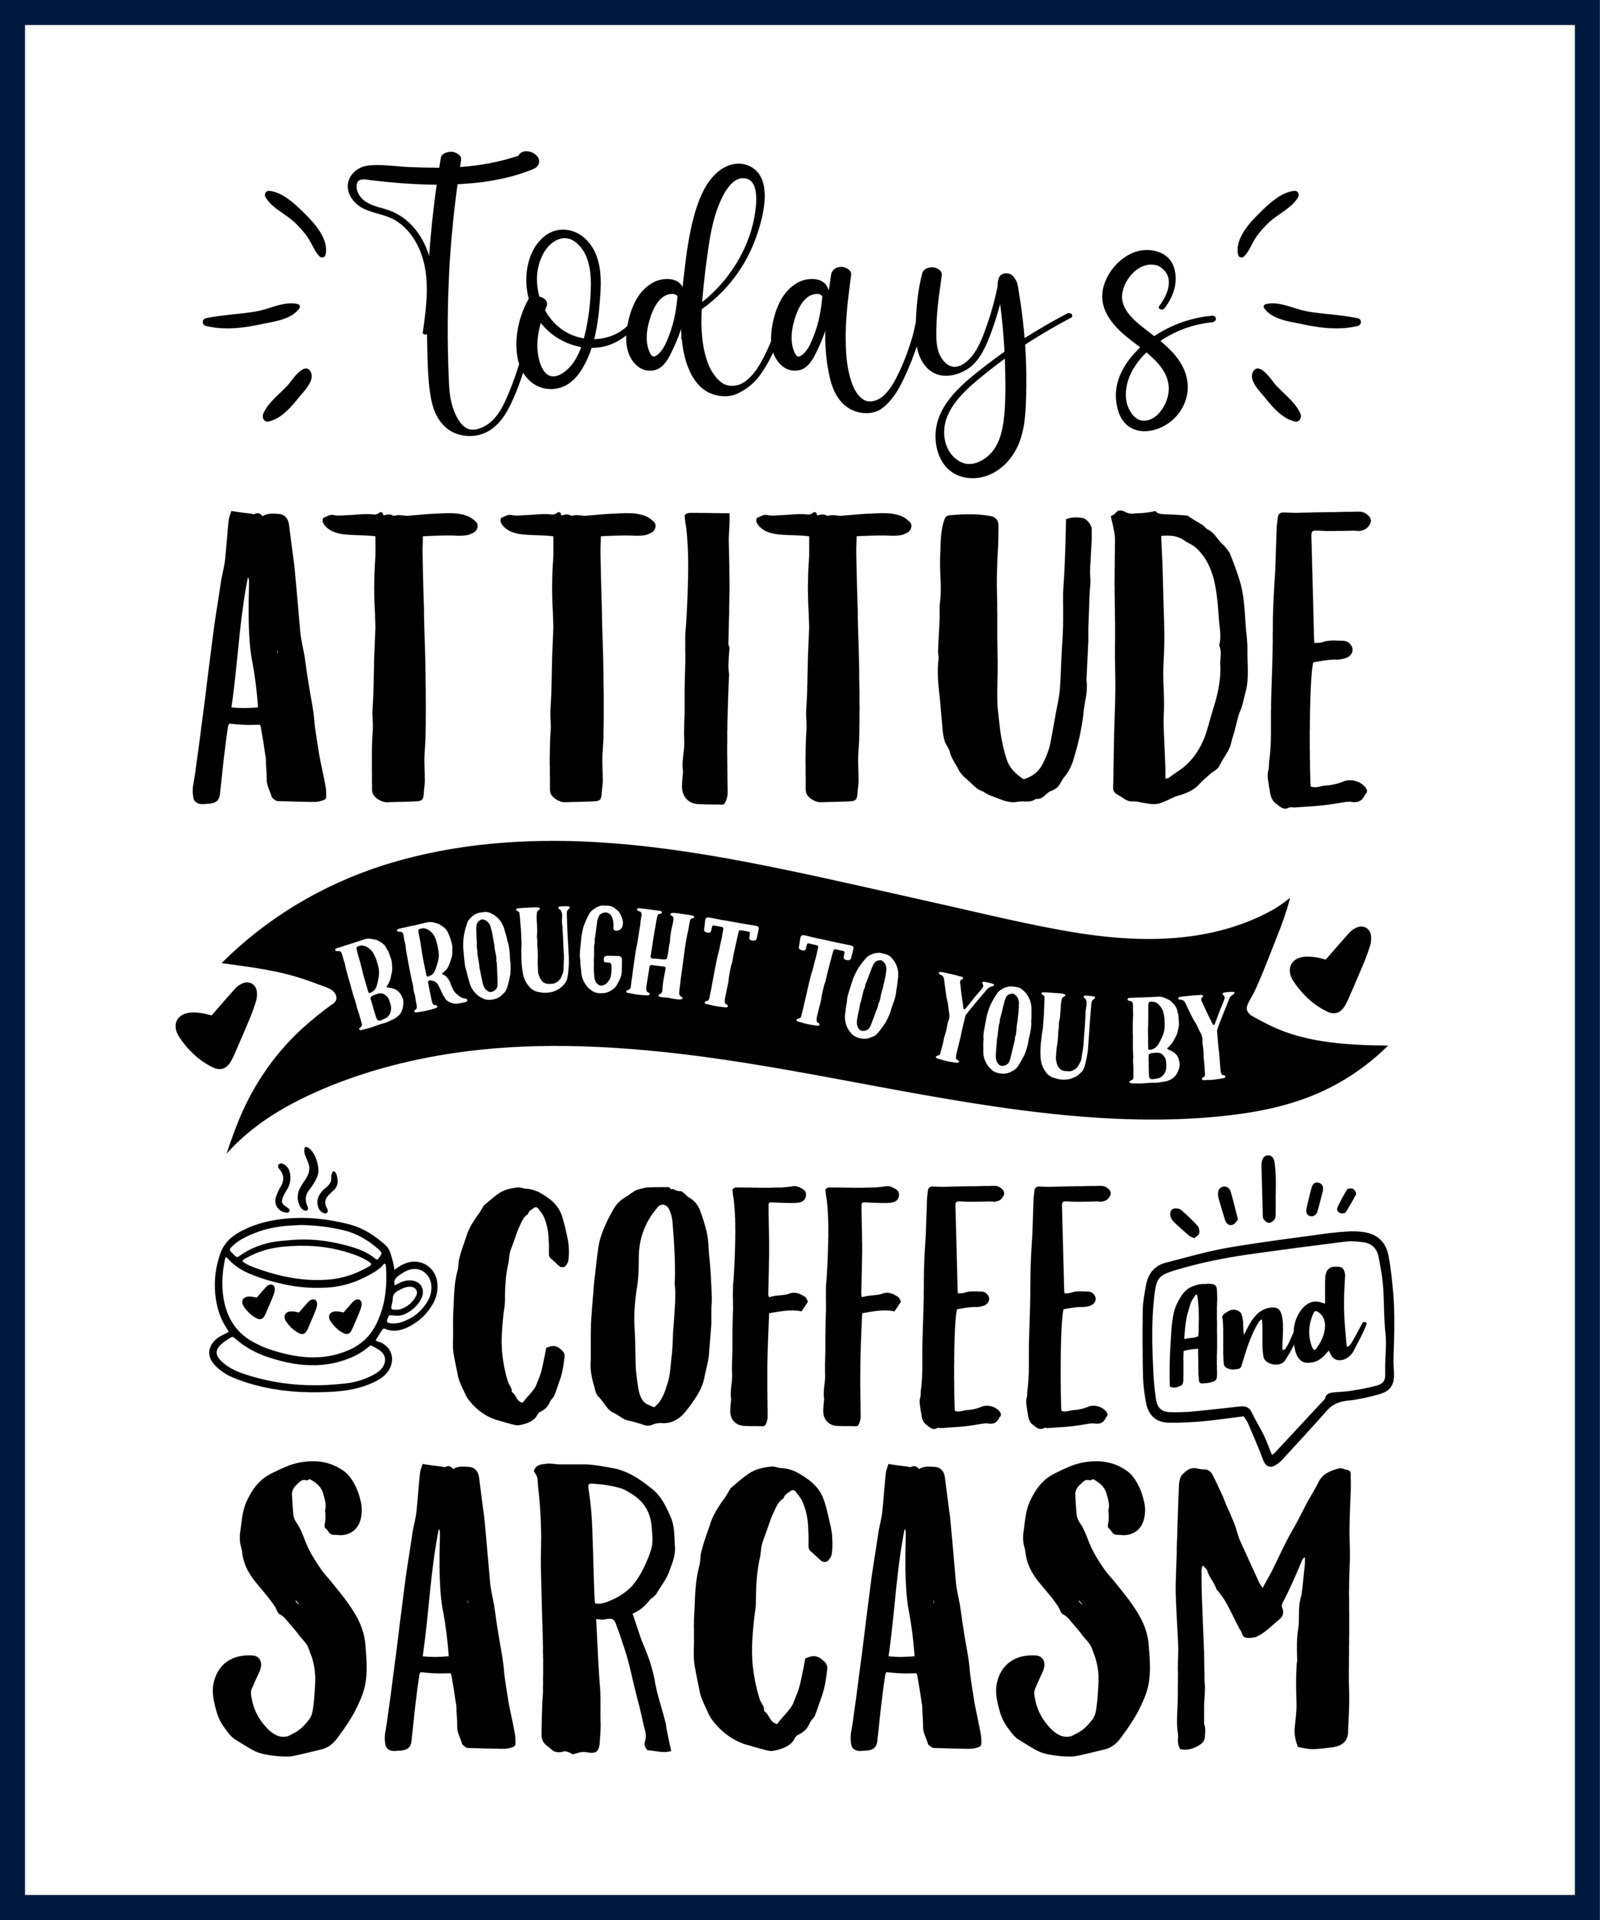 Funny sarcastic sassy quote for vector t shirt, mug, card. Funny saying,  funny text, phrase, humor print on white background. lettering design.  Todays attitude brought to you by coffee and sarcasm 13953593